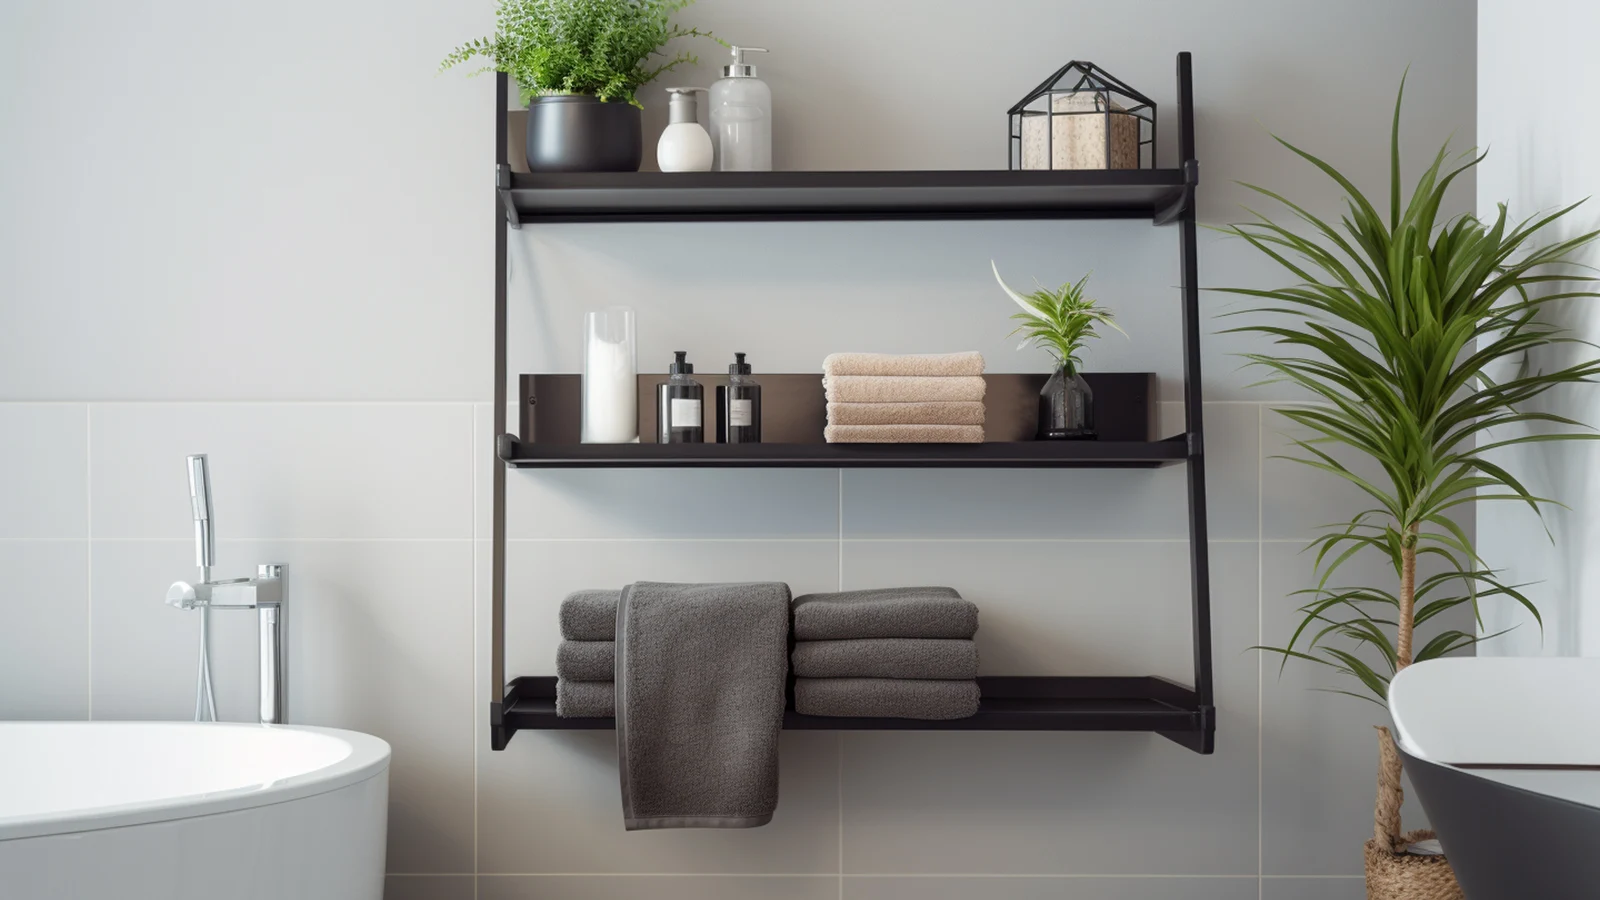 Discover how to decorate your apartment bathroom with a sleek black shelf and a vibrant potted plant.